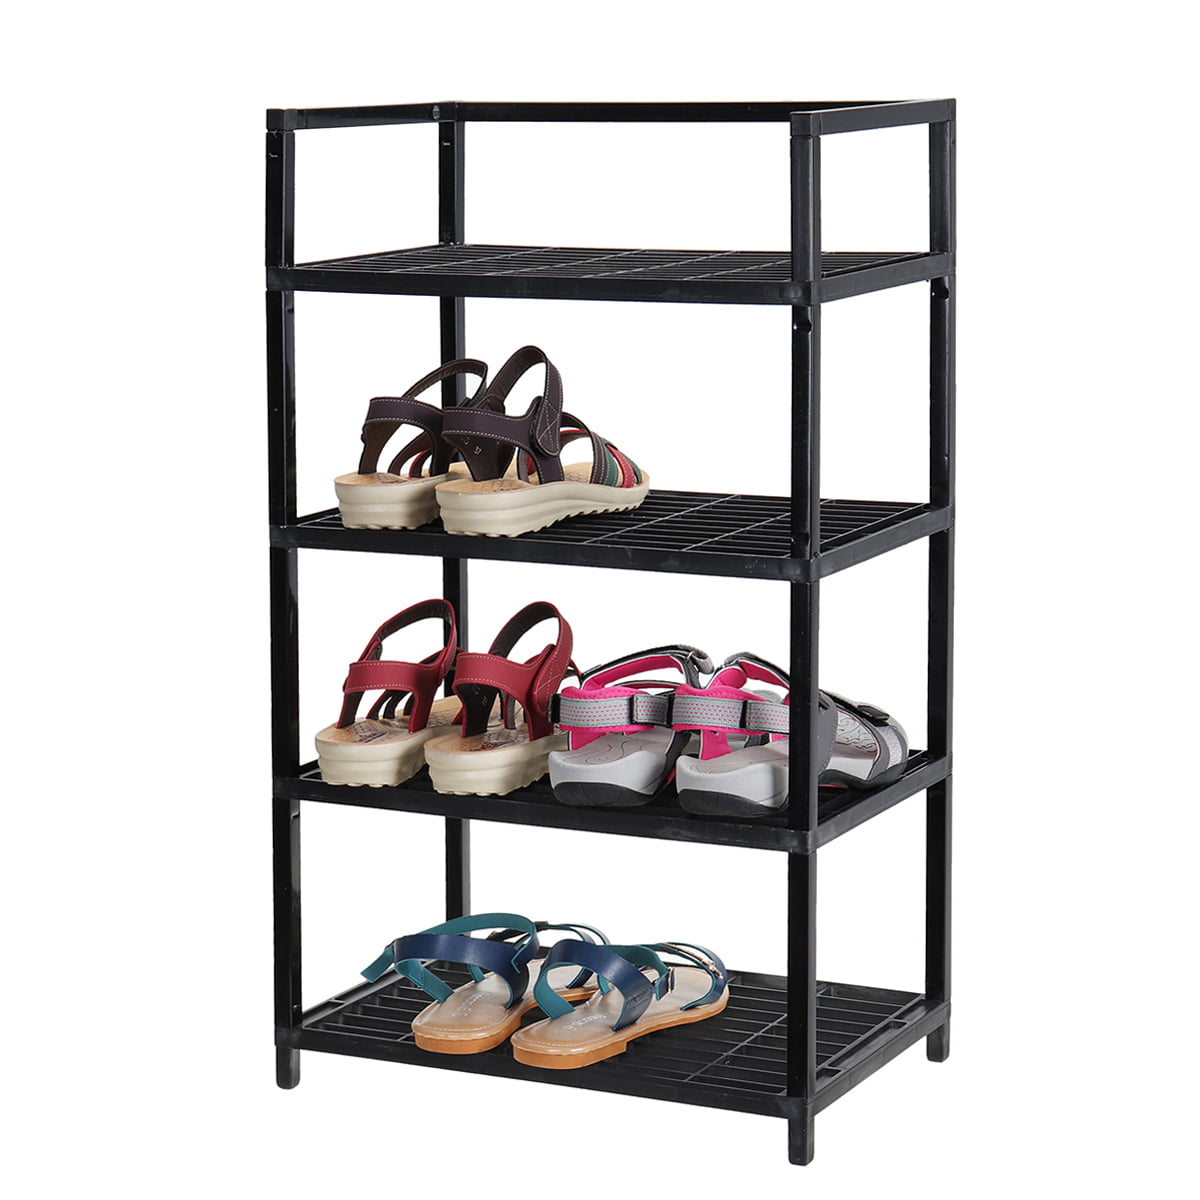 Dorm 4 Tier 20 Pair Shoe Rack Holder Storage Organizer Perfect For Home Office 